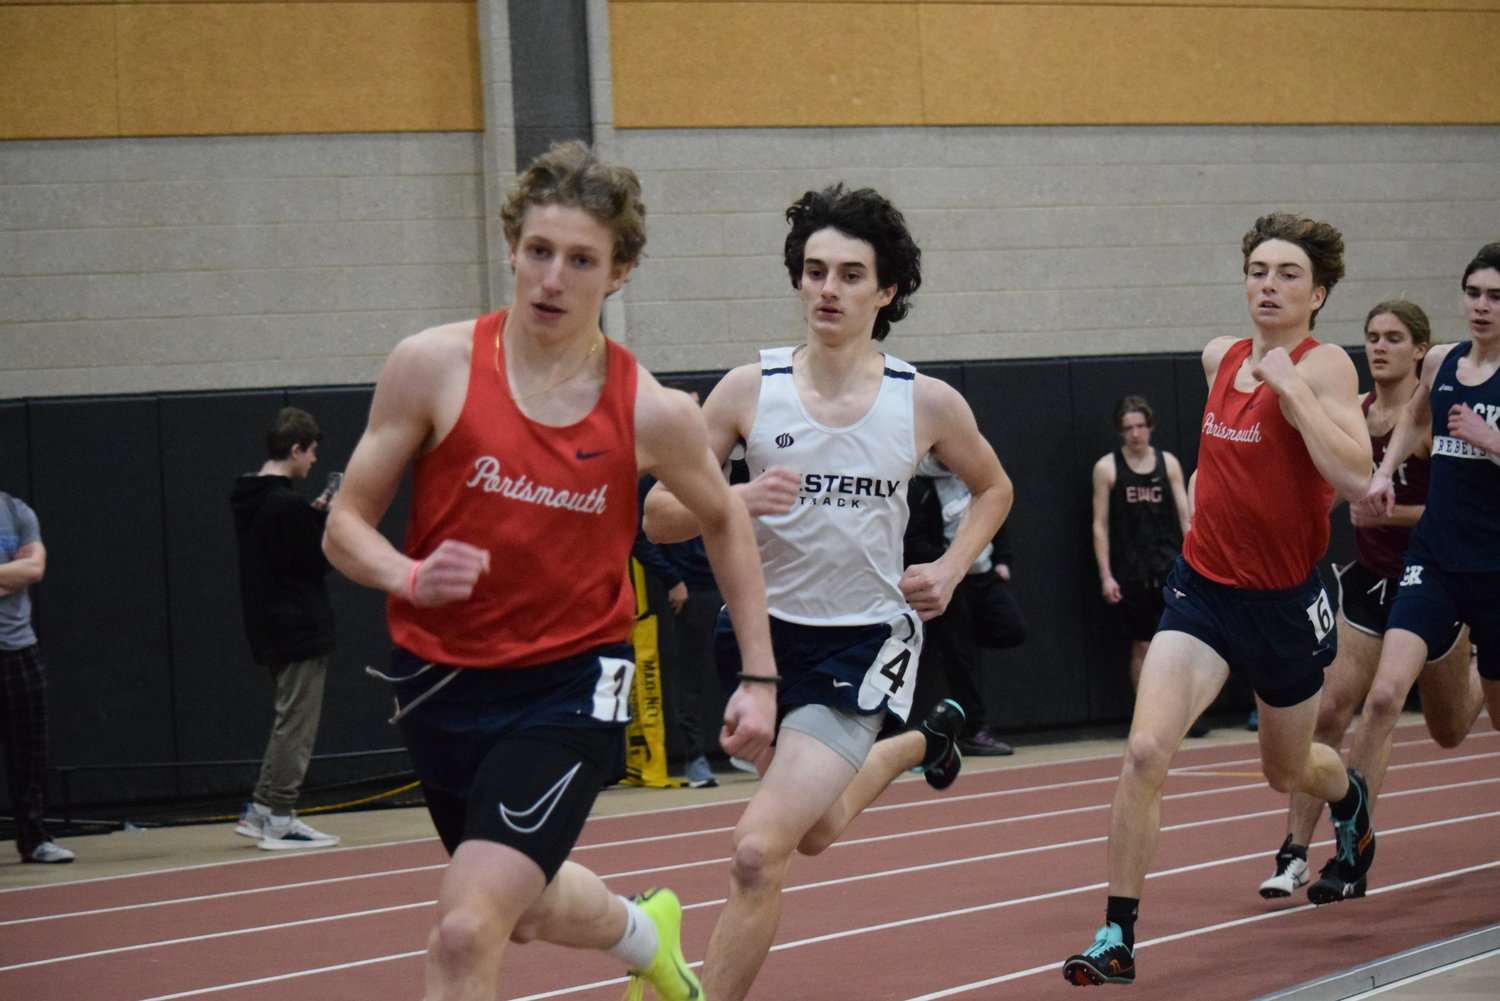 Portsmouth’s Oliver Tibbets (foreground) and Wake Zani (third from left) compete in the 600-meter run.